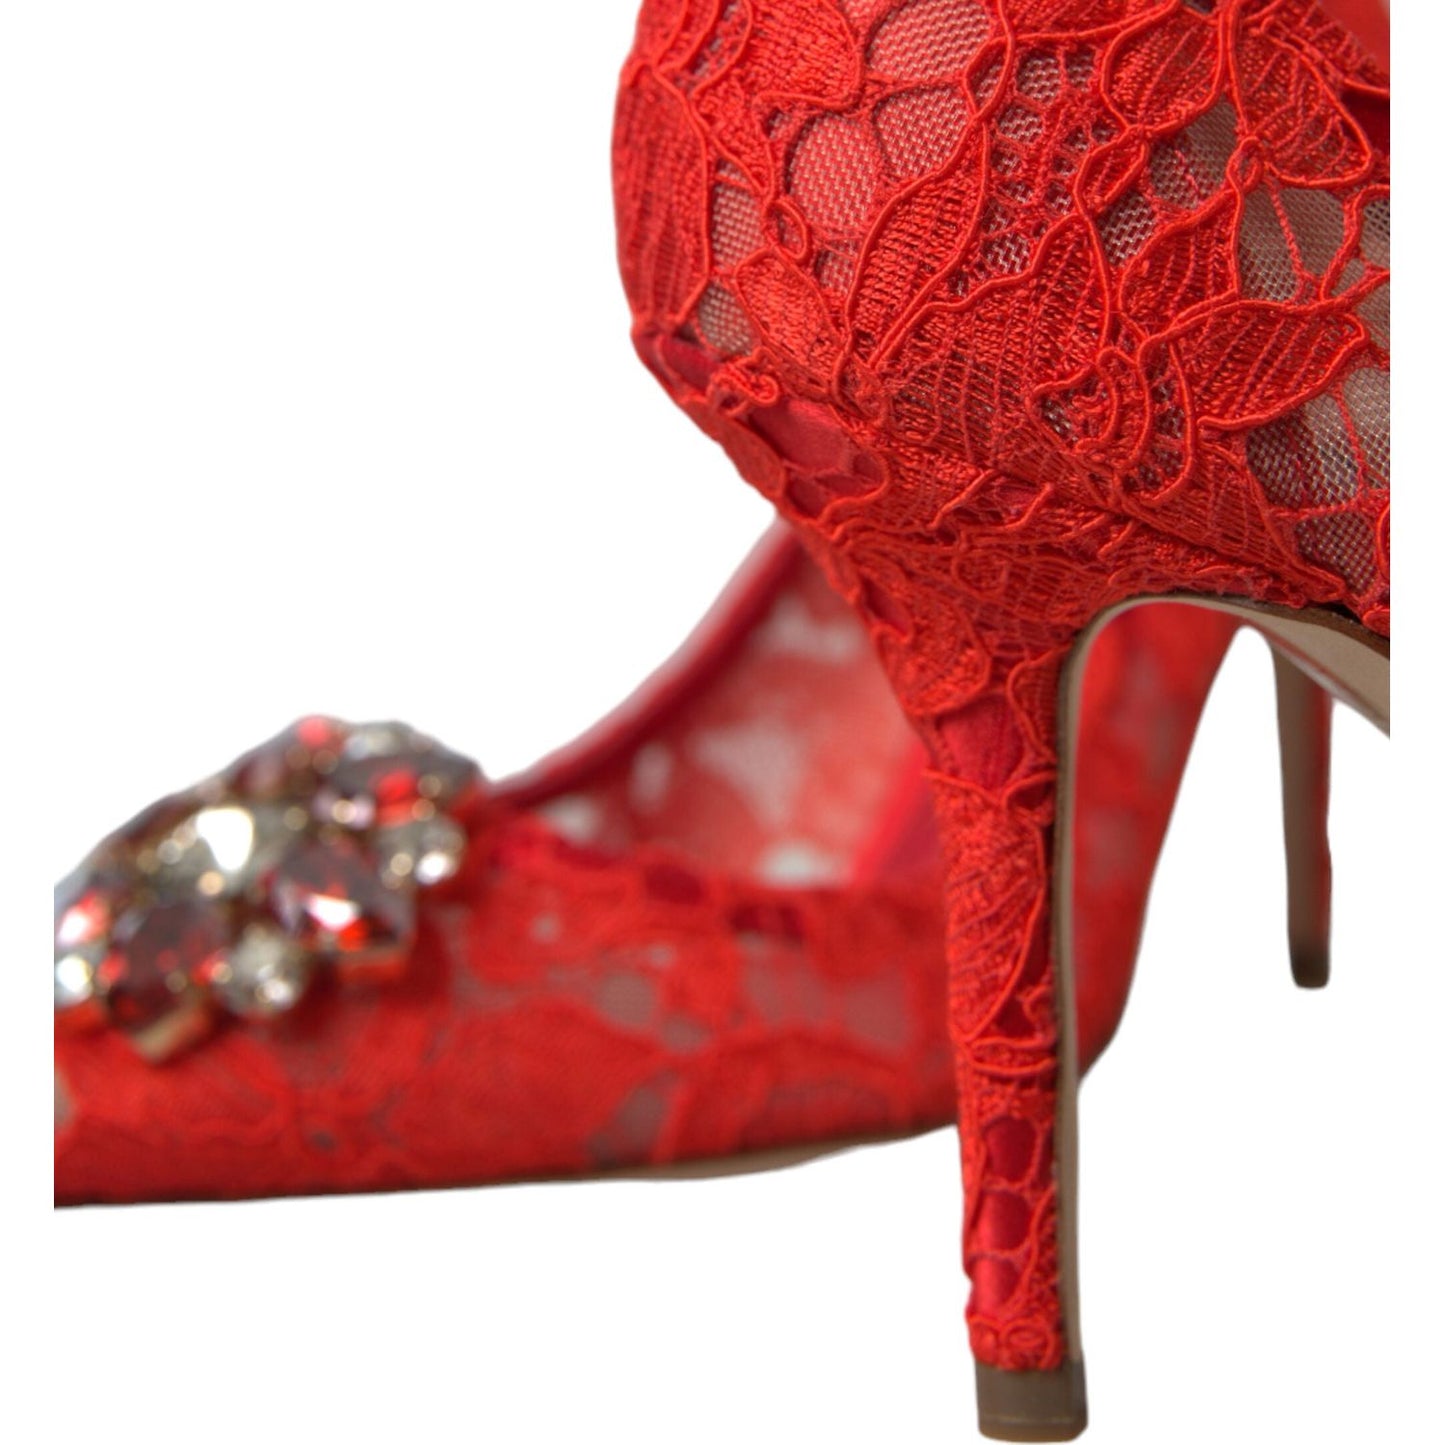 Dolce & Gabbana Exquisite Crystal-Embellished Red Lace Heels red-taormina-lace-crystal-heels-pumps-shoes-1